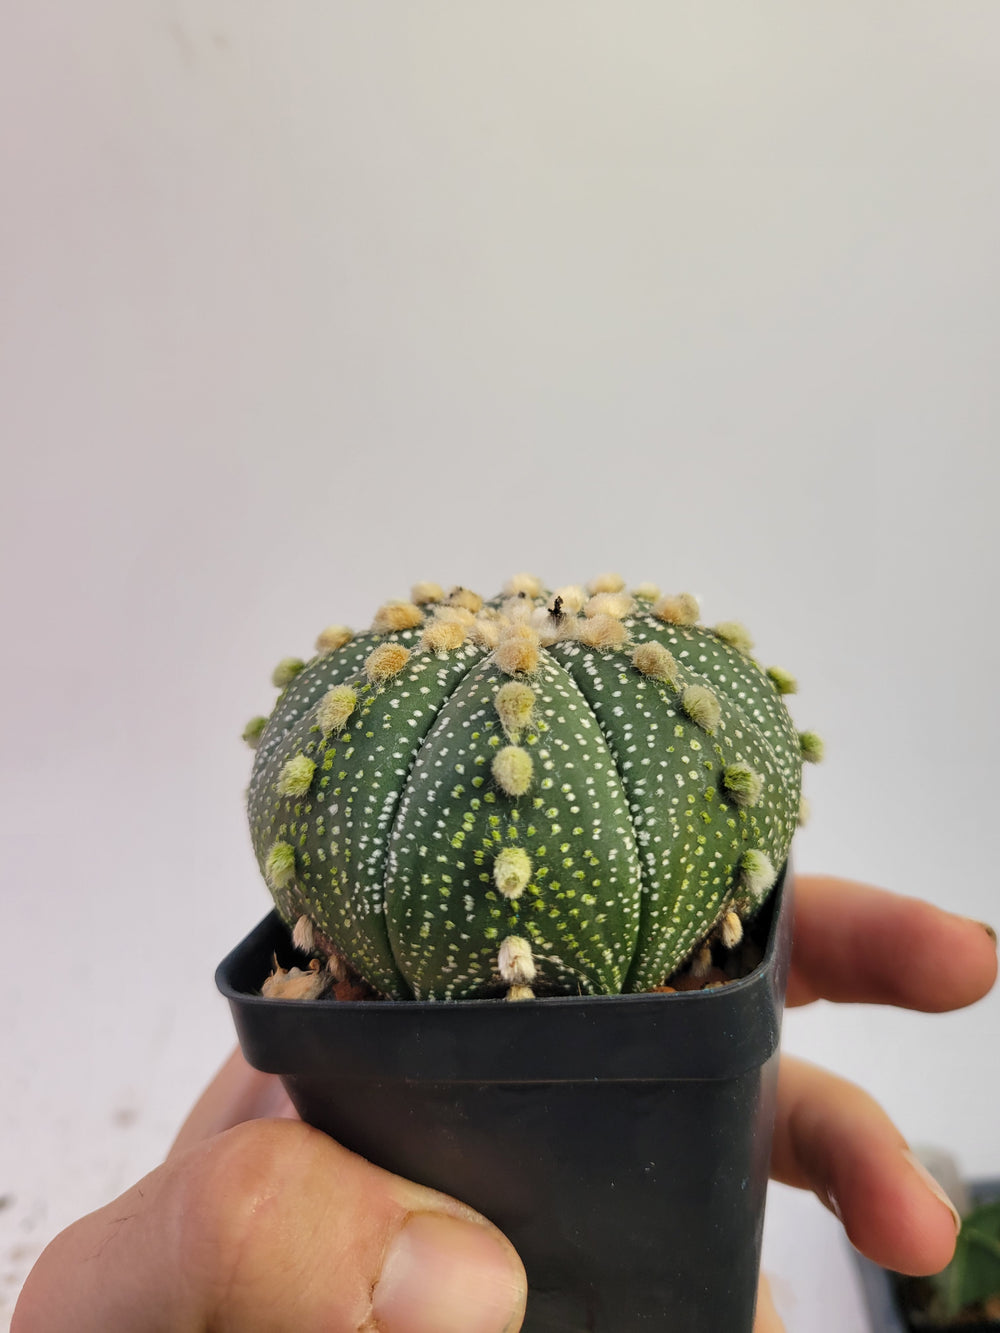 Astrophytum asterias cv. Superkabuto, rooted and established Deaw Cactus- Flowering Seed Grown#T21 - Nice Plants Good Pots